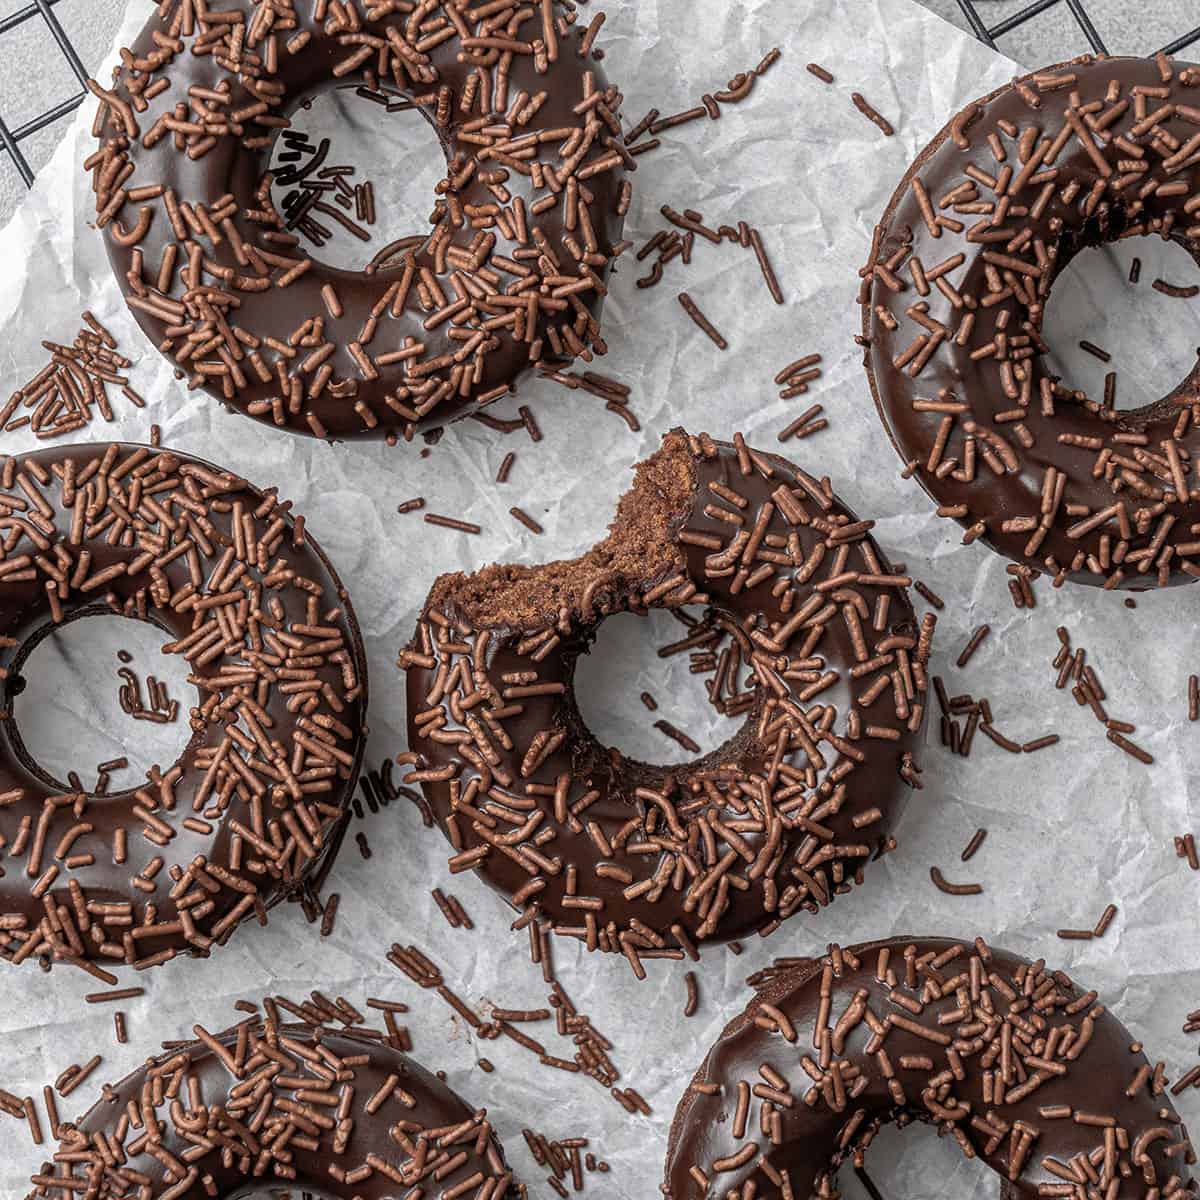 6 baked chocolate donuts on a cooling rack.